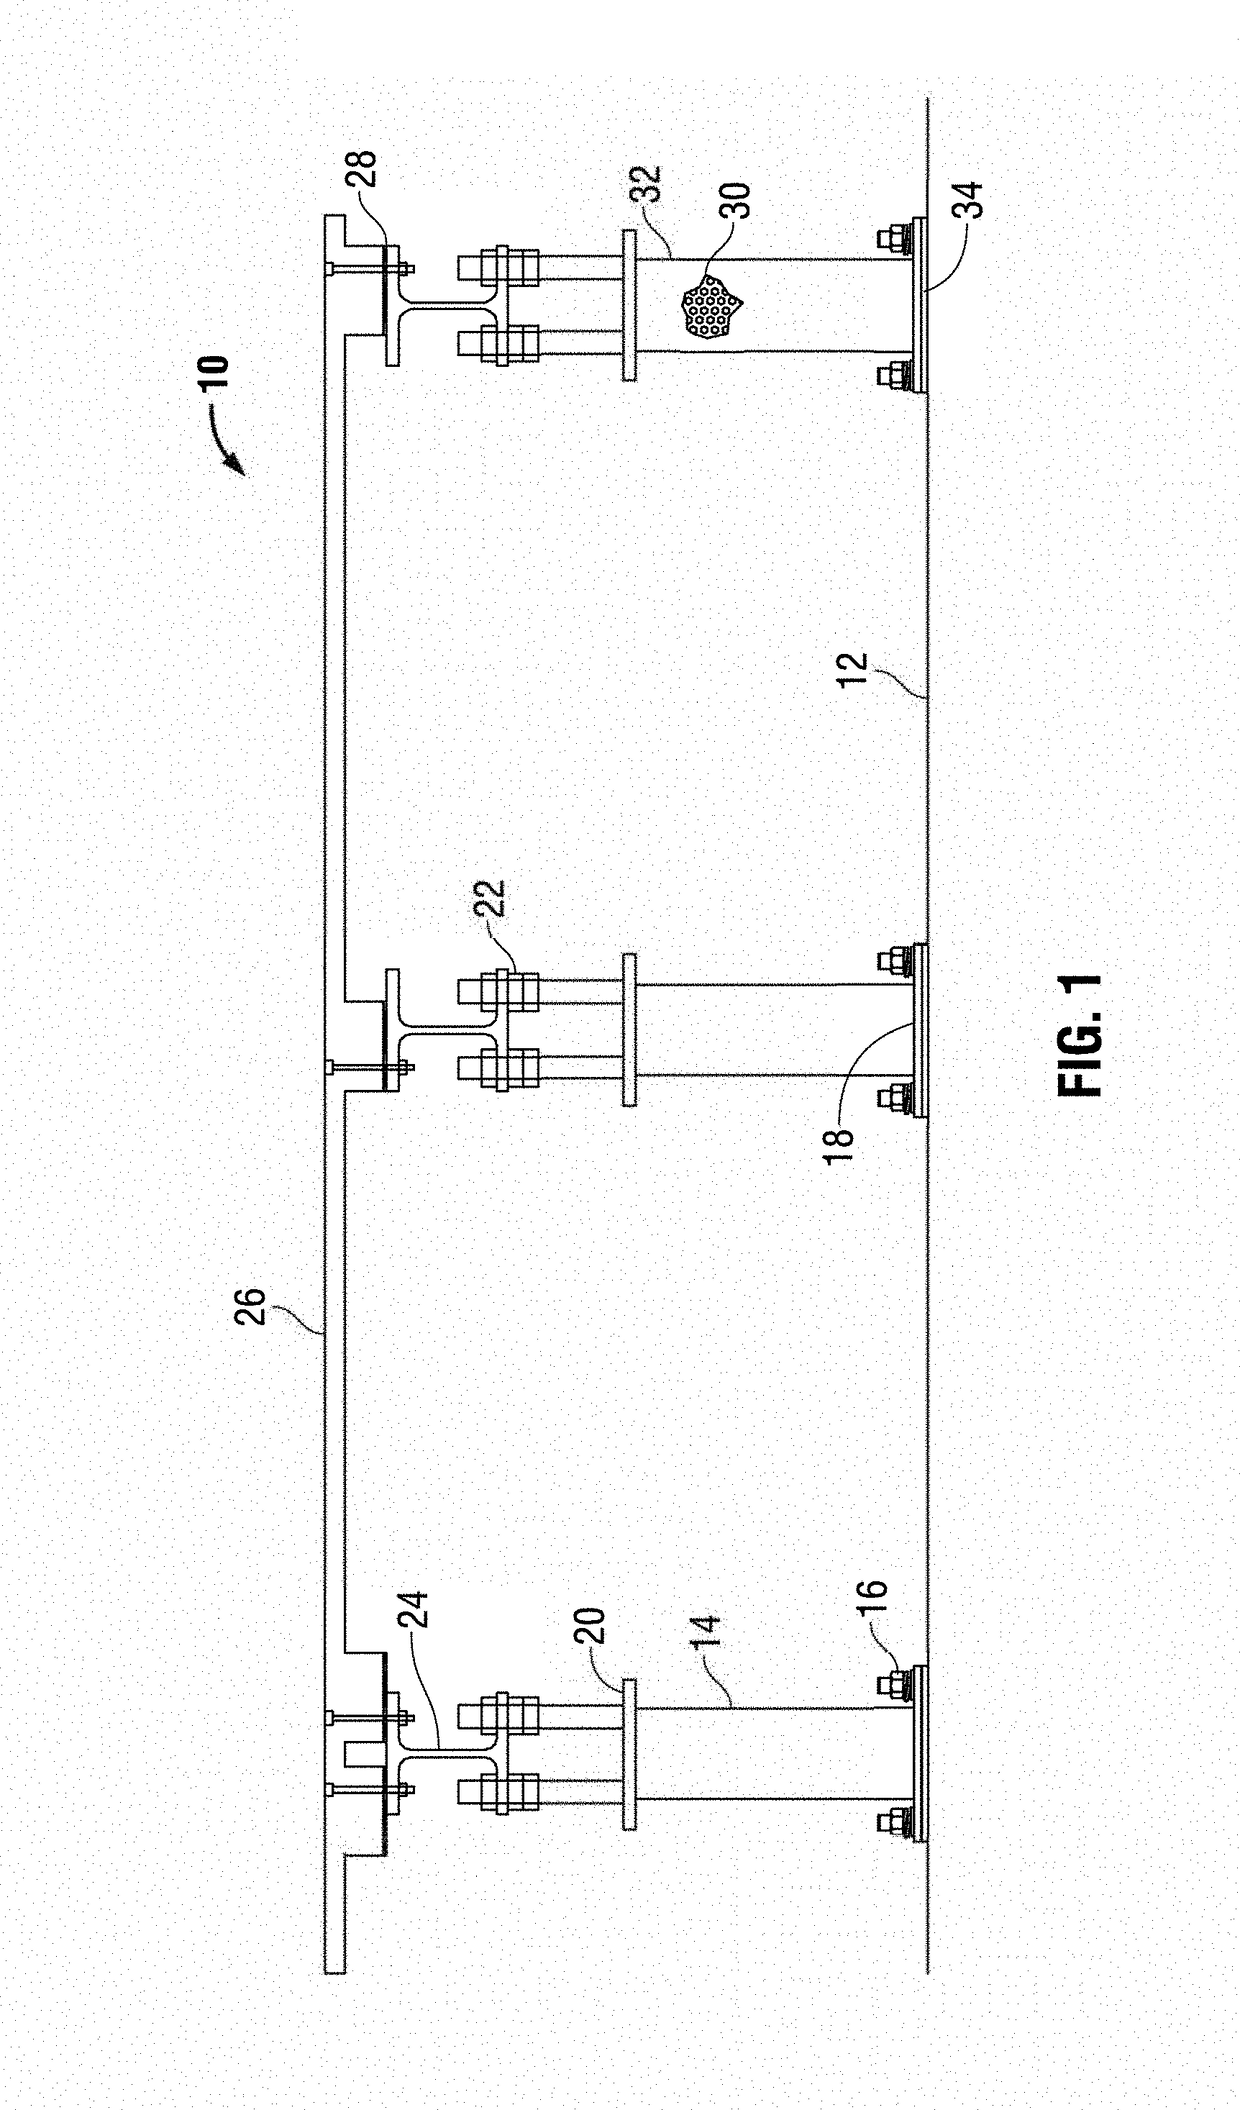 Method for improved semiconductor processing equipment tool pedestal/pad vibration isolation and reduction